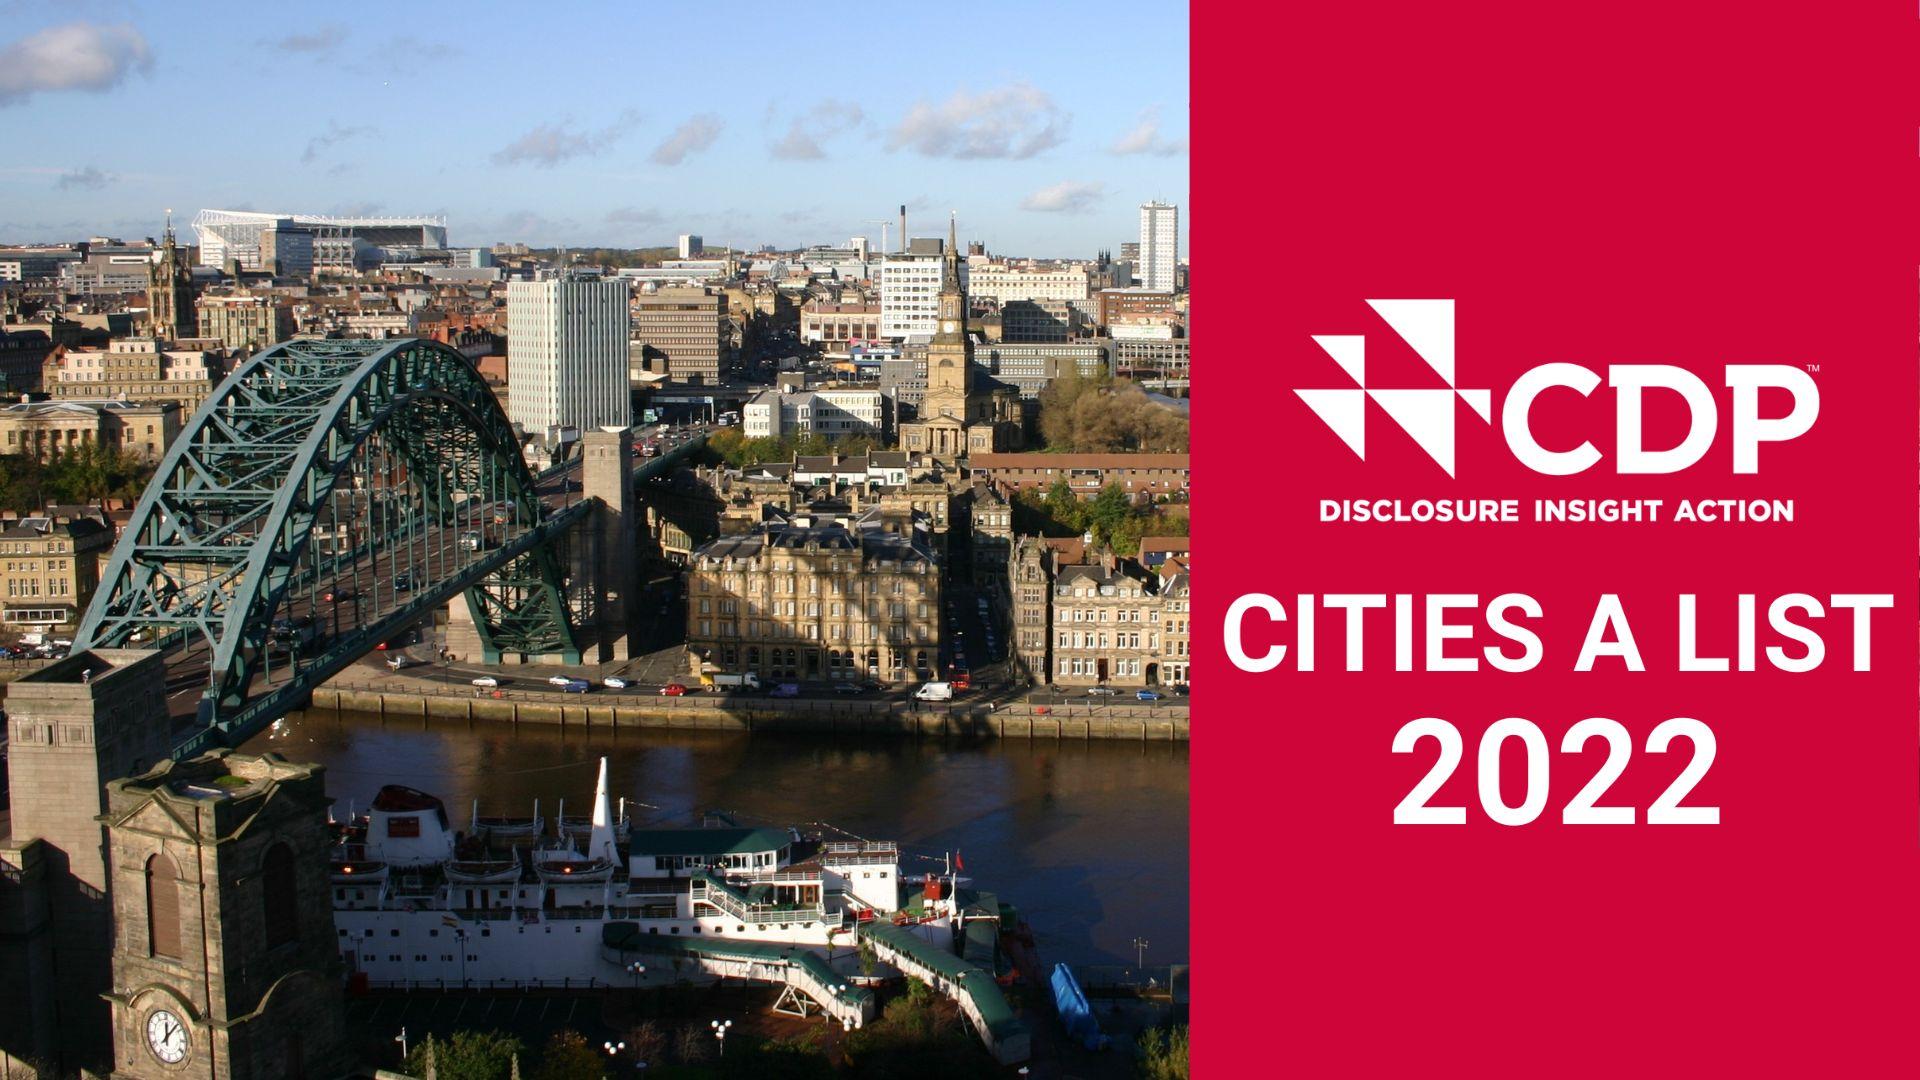 Newcastle has retained its top ‘A’ grade status from international climate research provider CDP